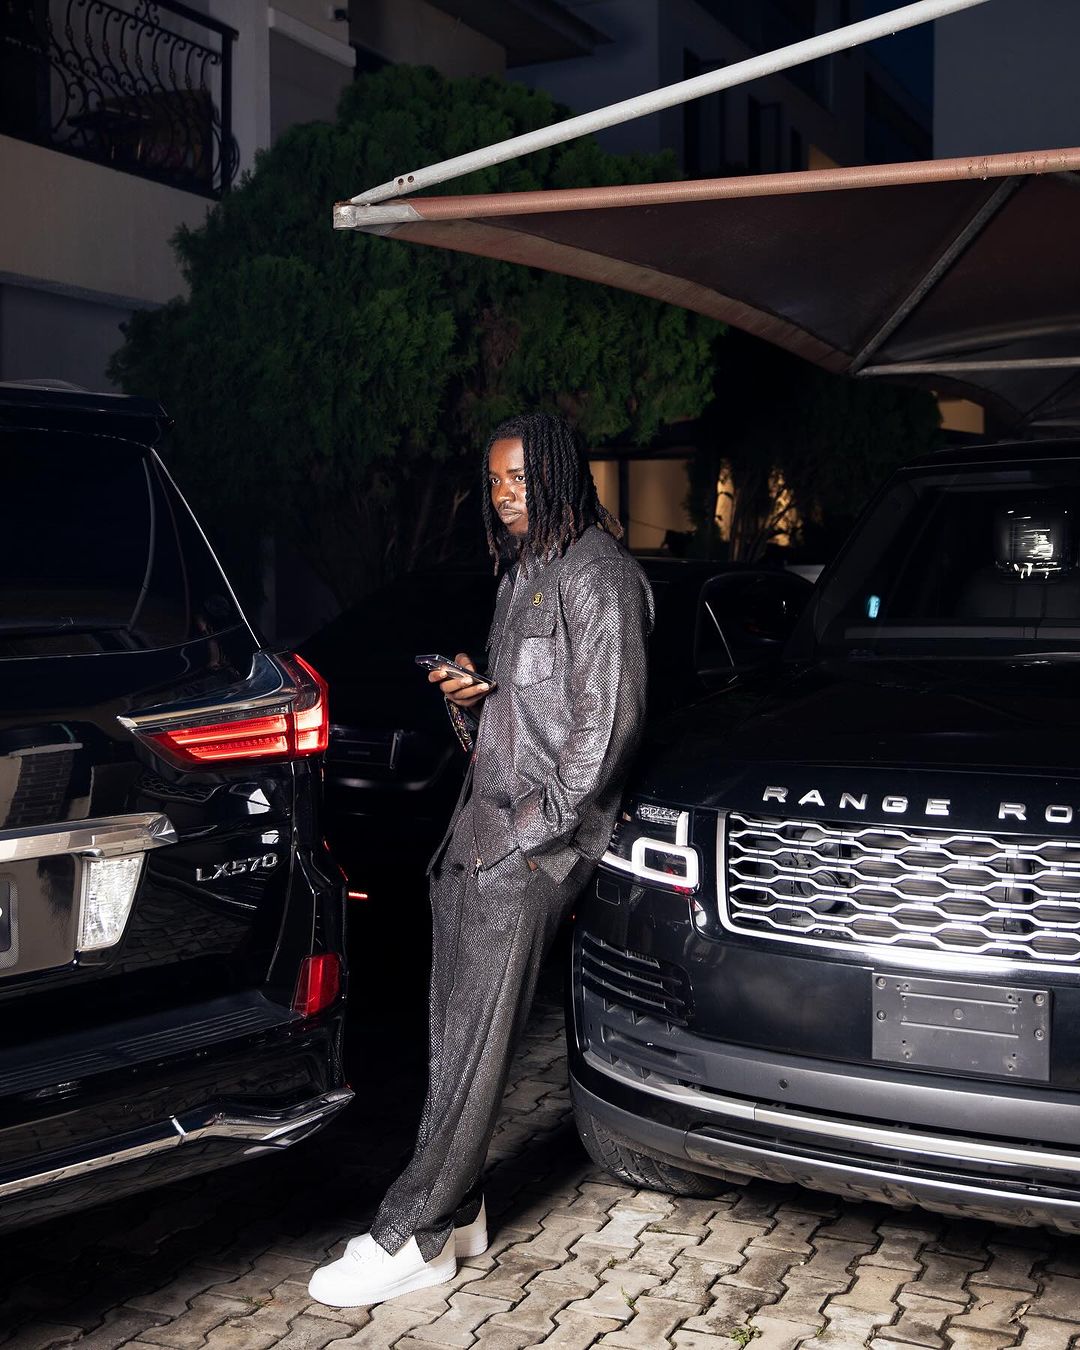 "Bagged another one!" – Lord Lamba celebrates as he acquires a brand new SUV